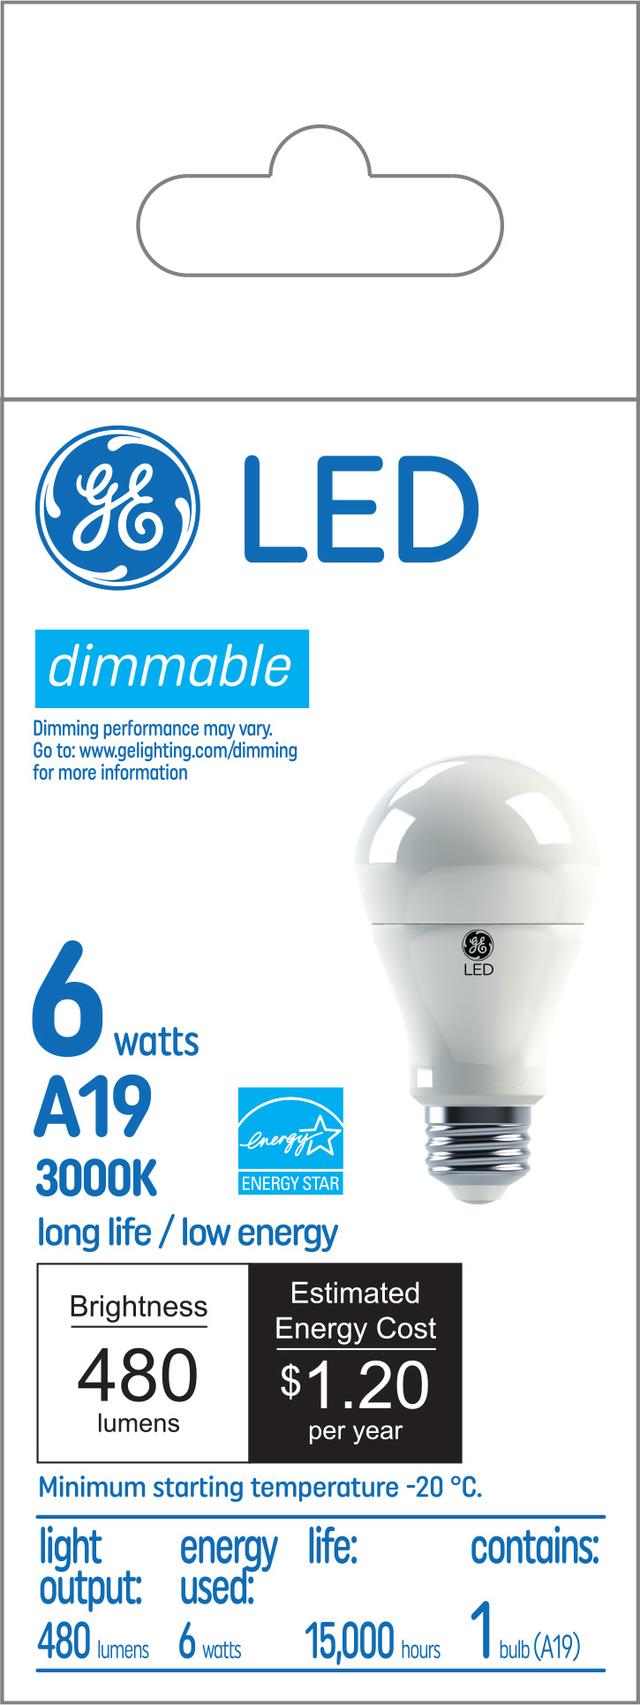 GE Classic LED 6 Watt Replacement, Warm White, A19 General Purpose Bulb (1 Pack)